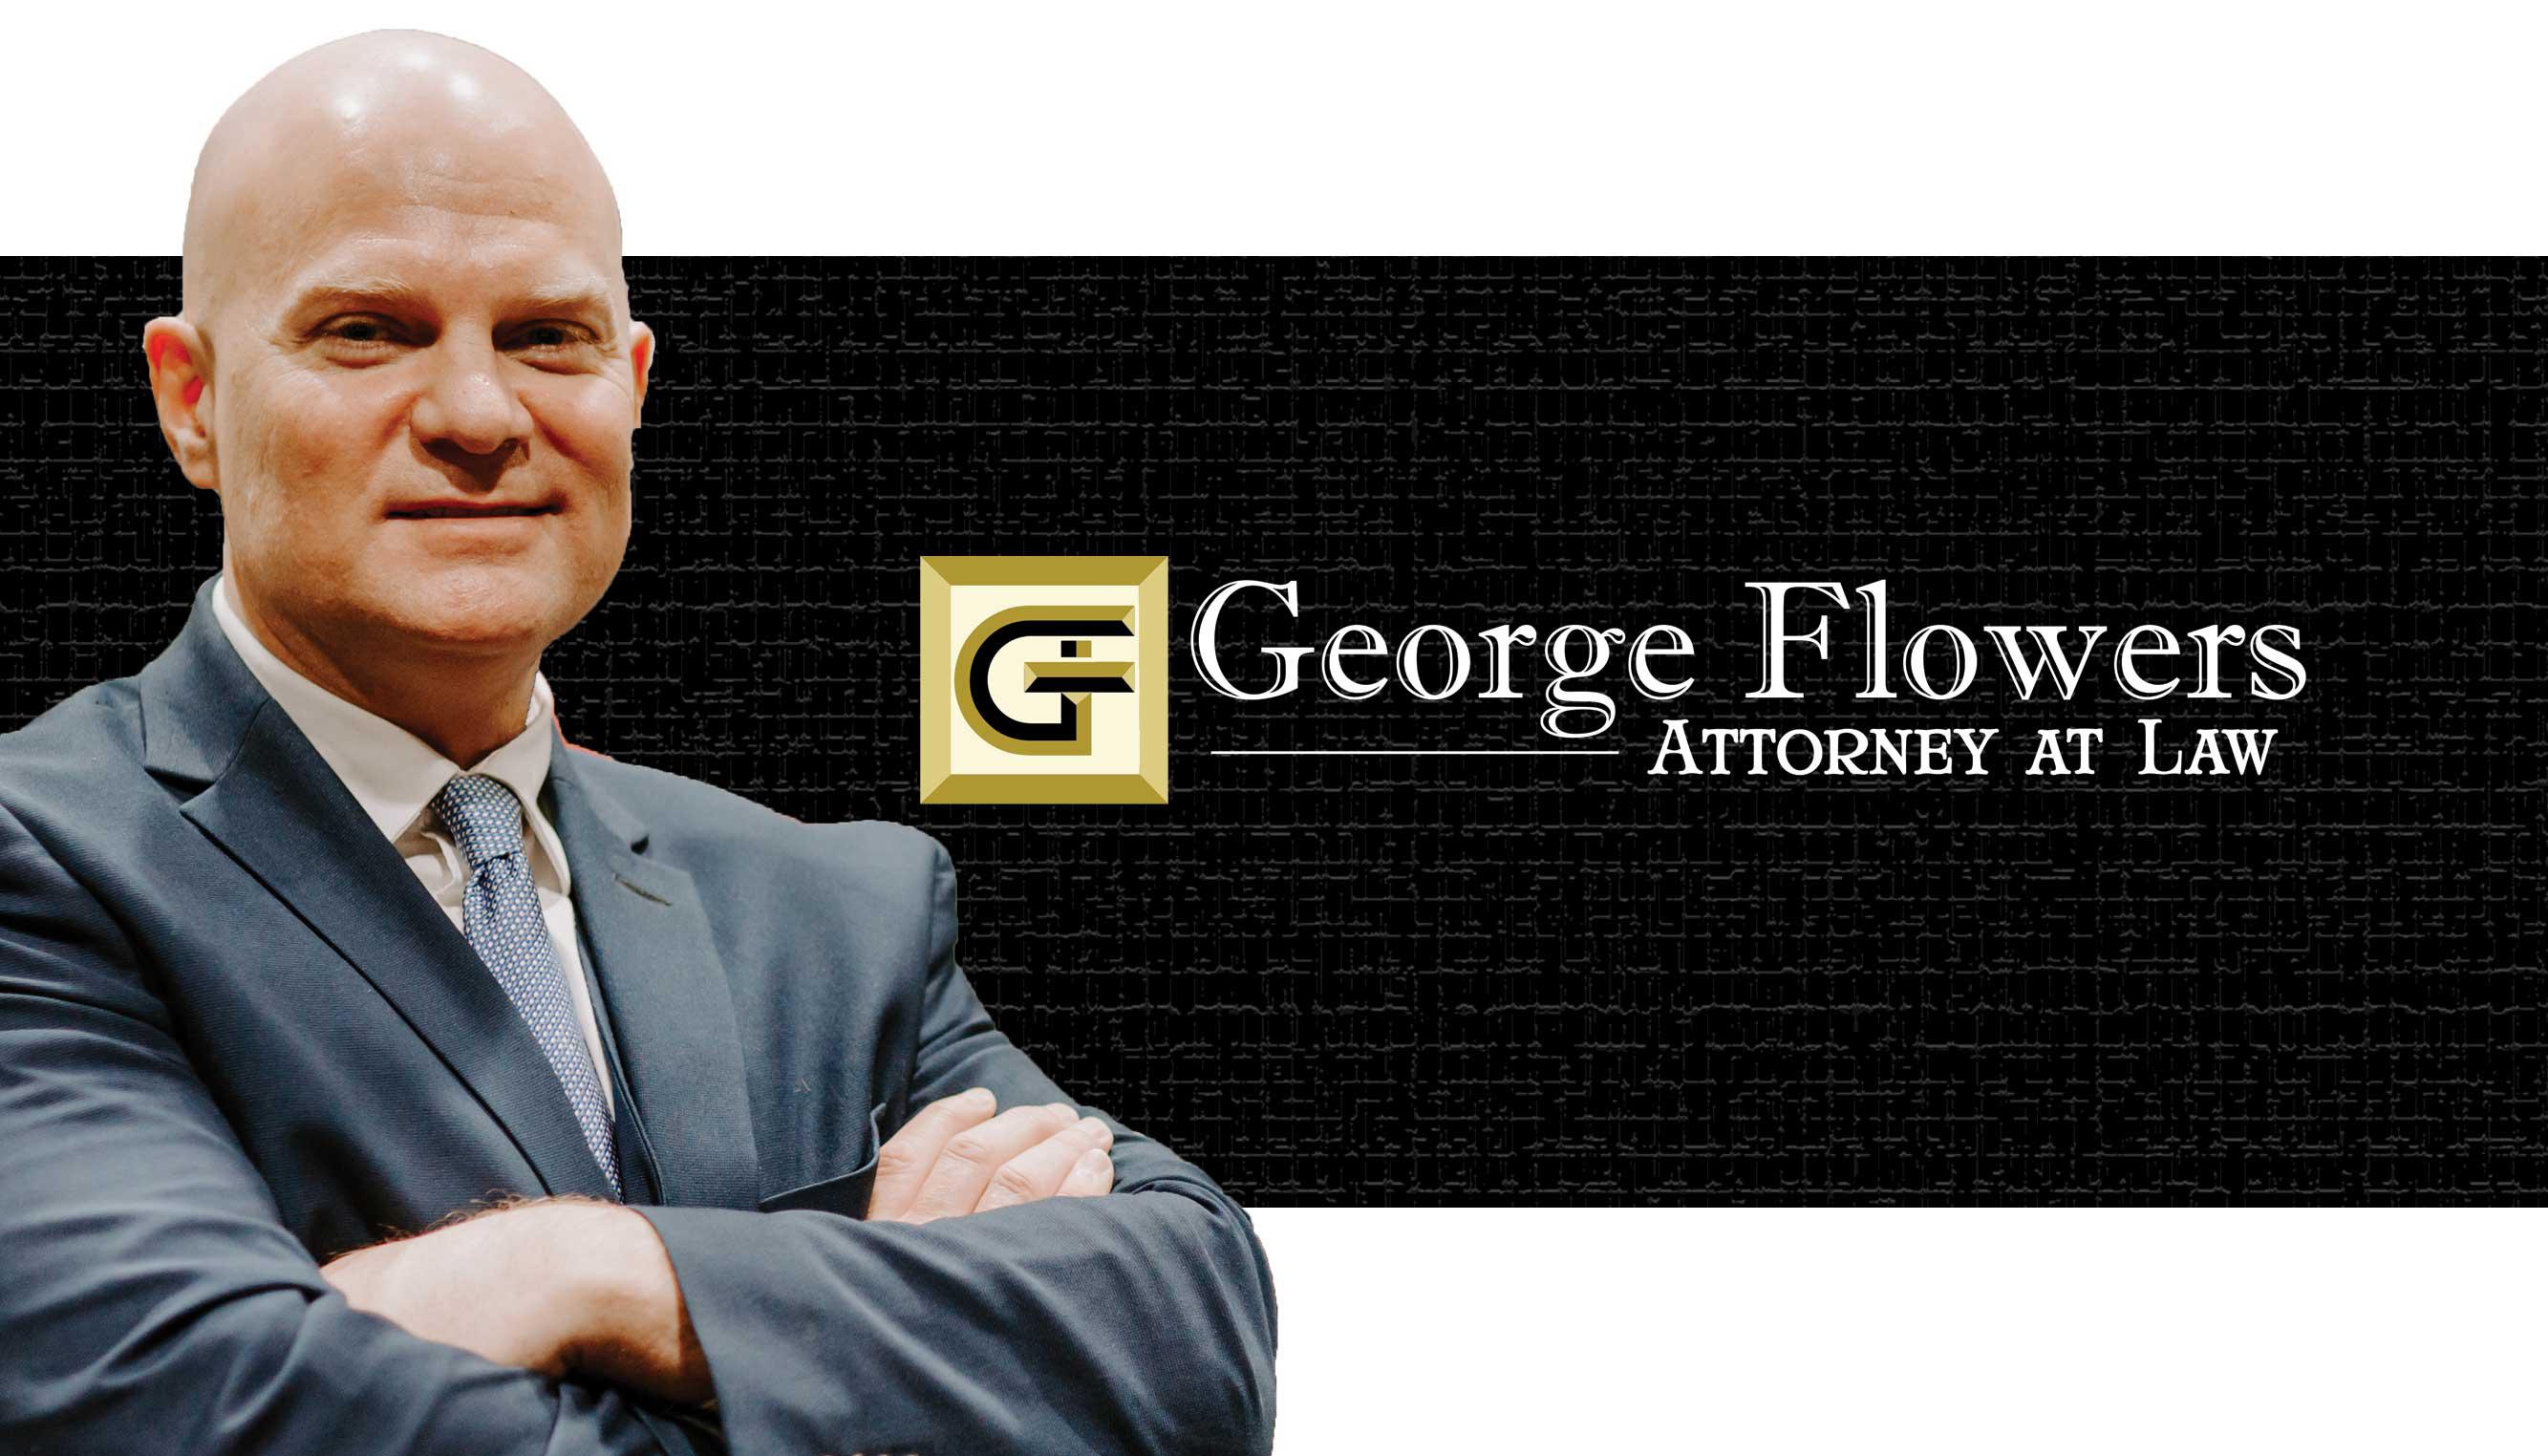 George Flowers, Attorney at Law Photo